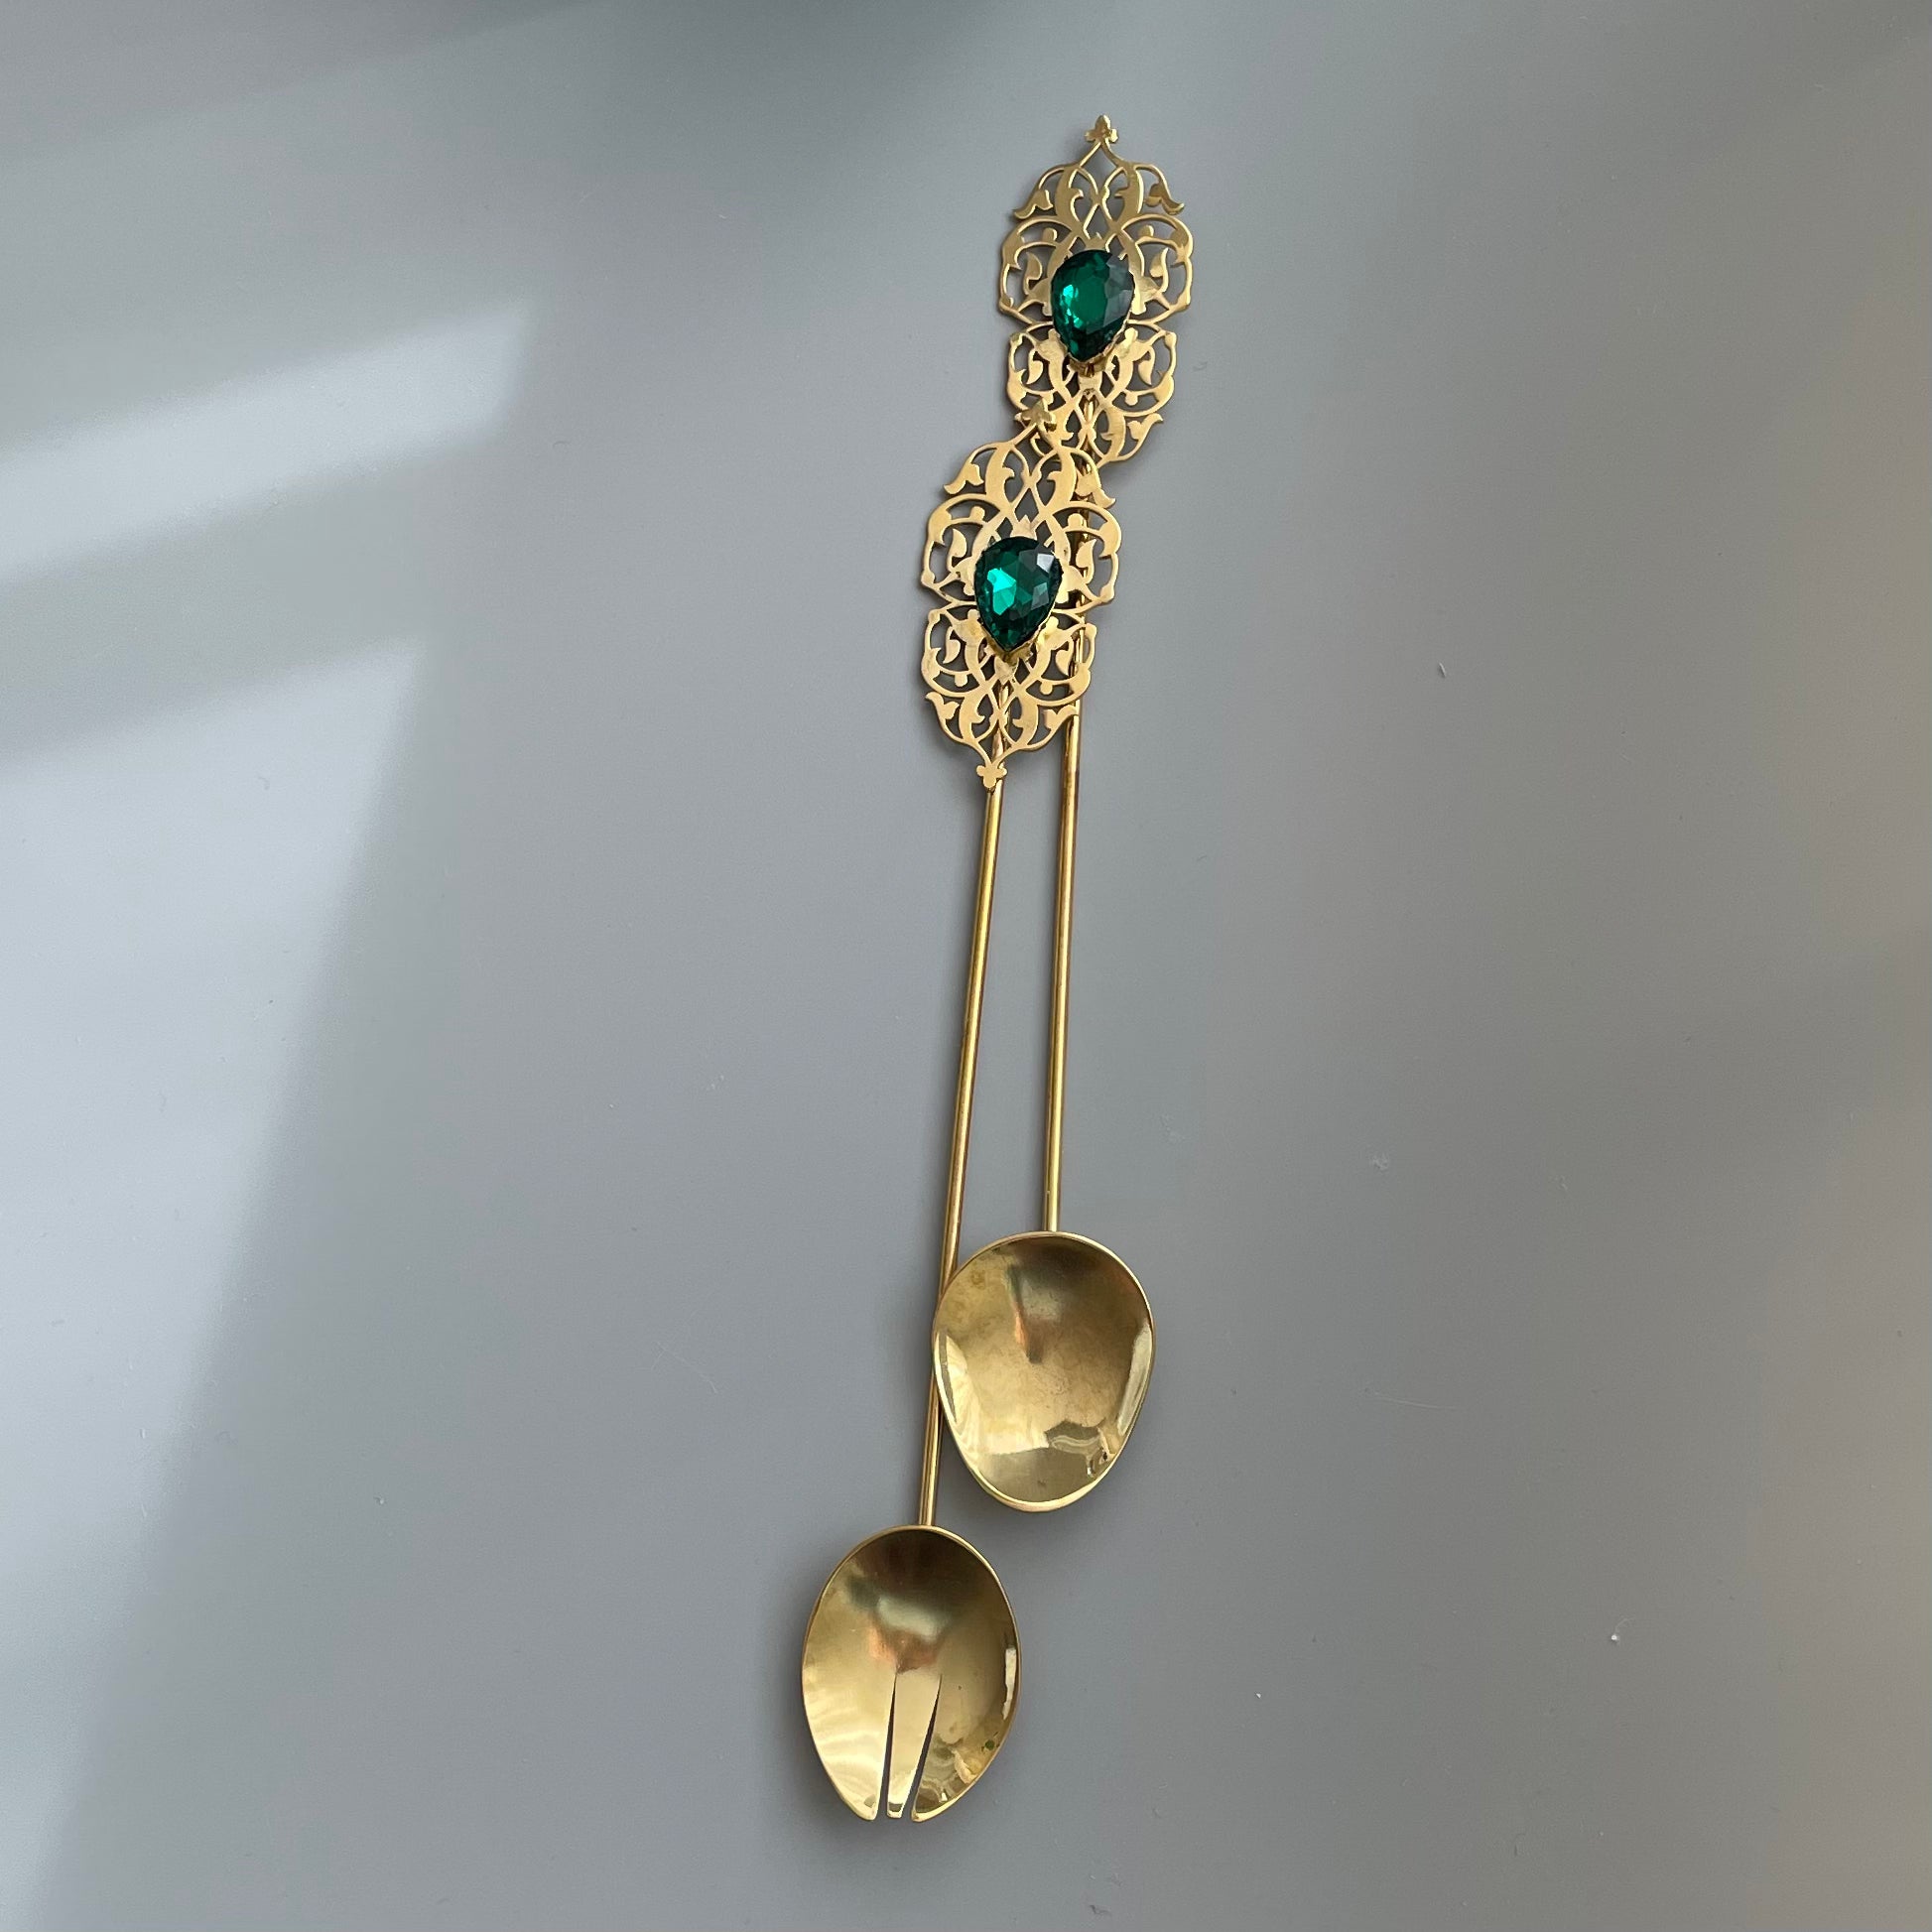 Decorative handmade Brass Spoon and Fork with Shiny Gemstone